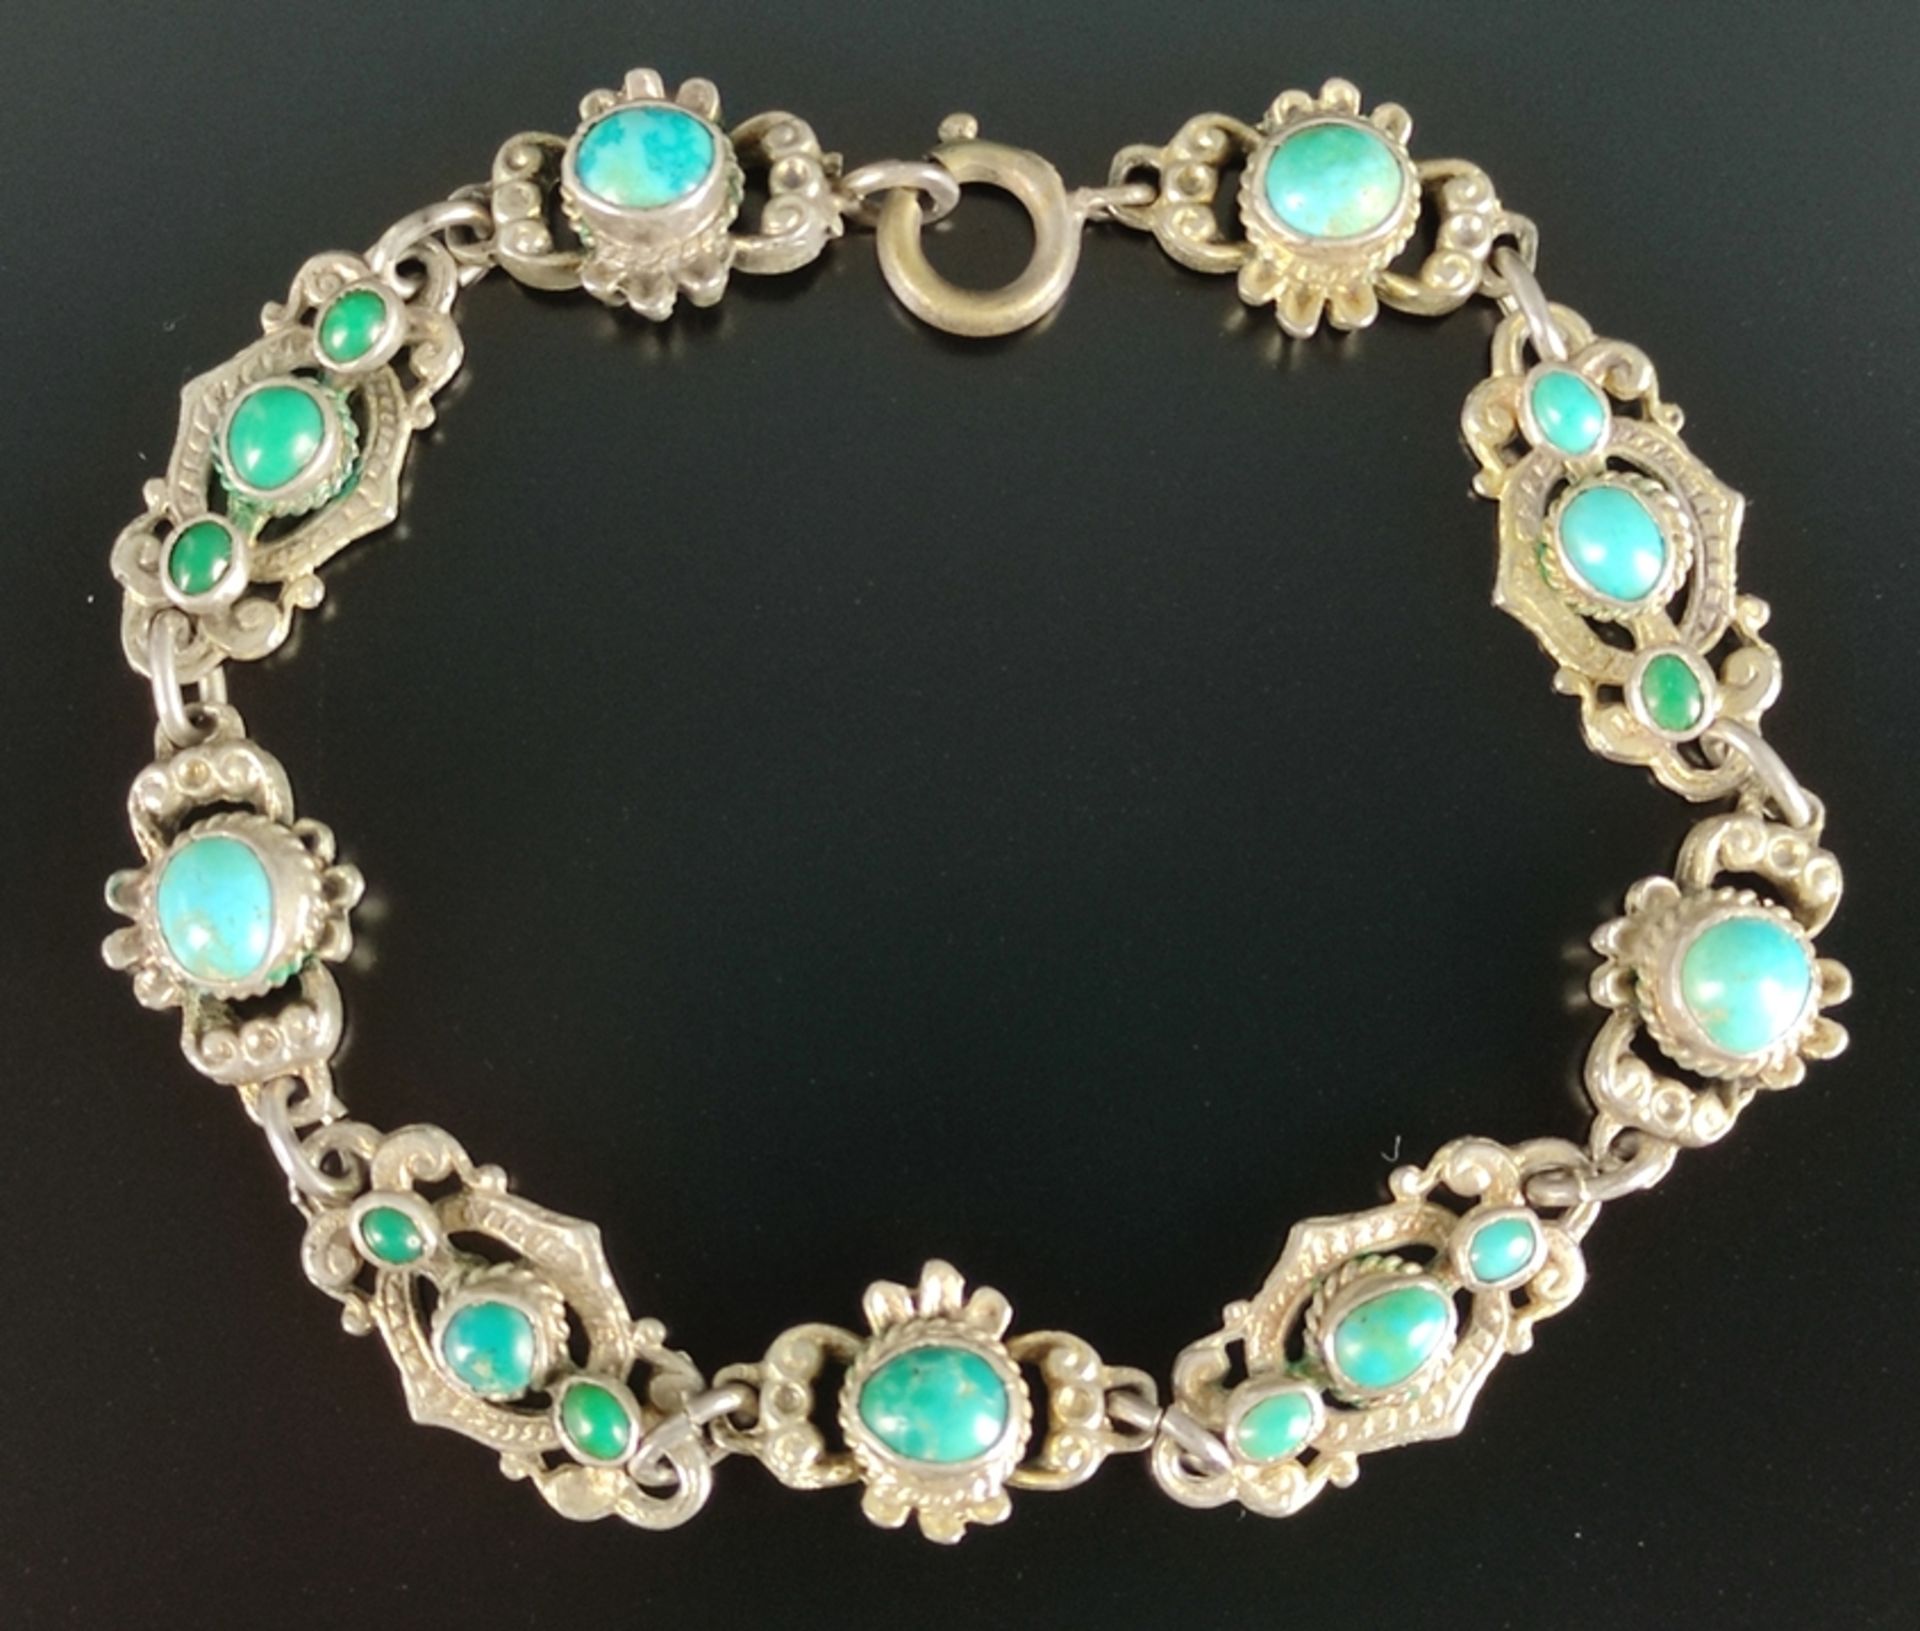 Antique bracelet with natural turquoises, ring clasp, 14.5g, length 19cm